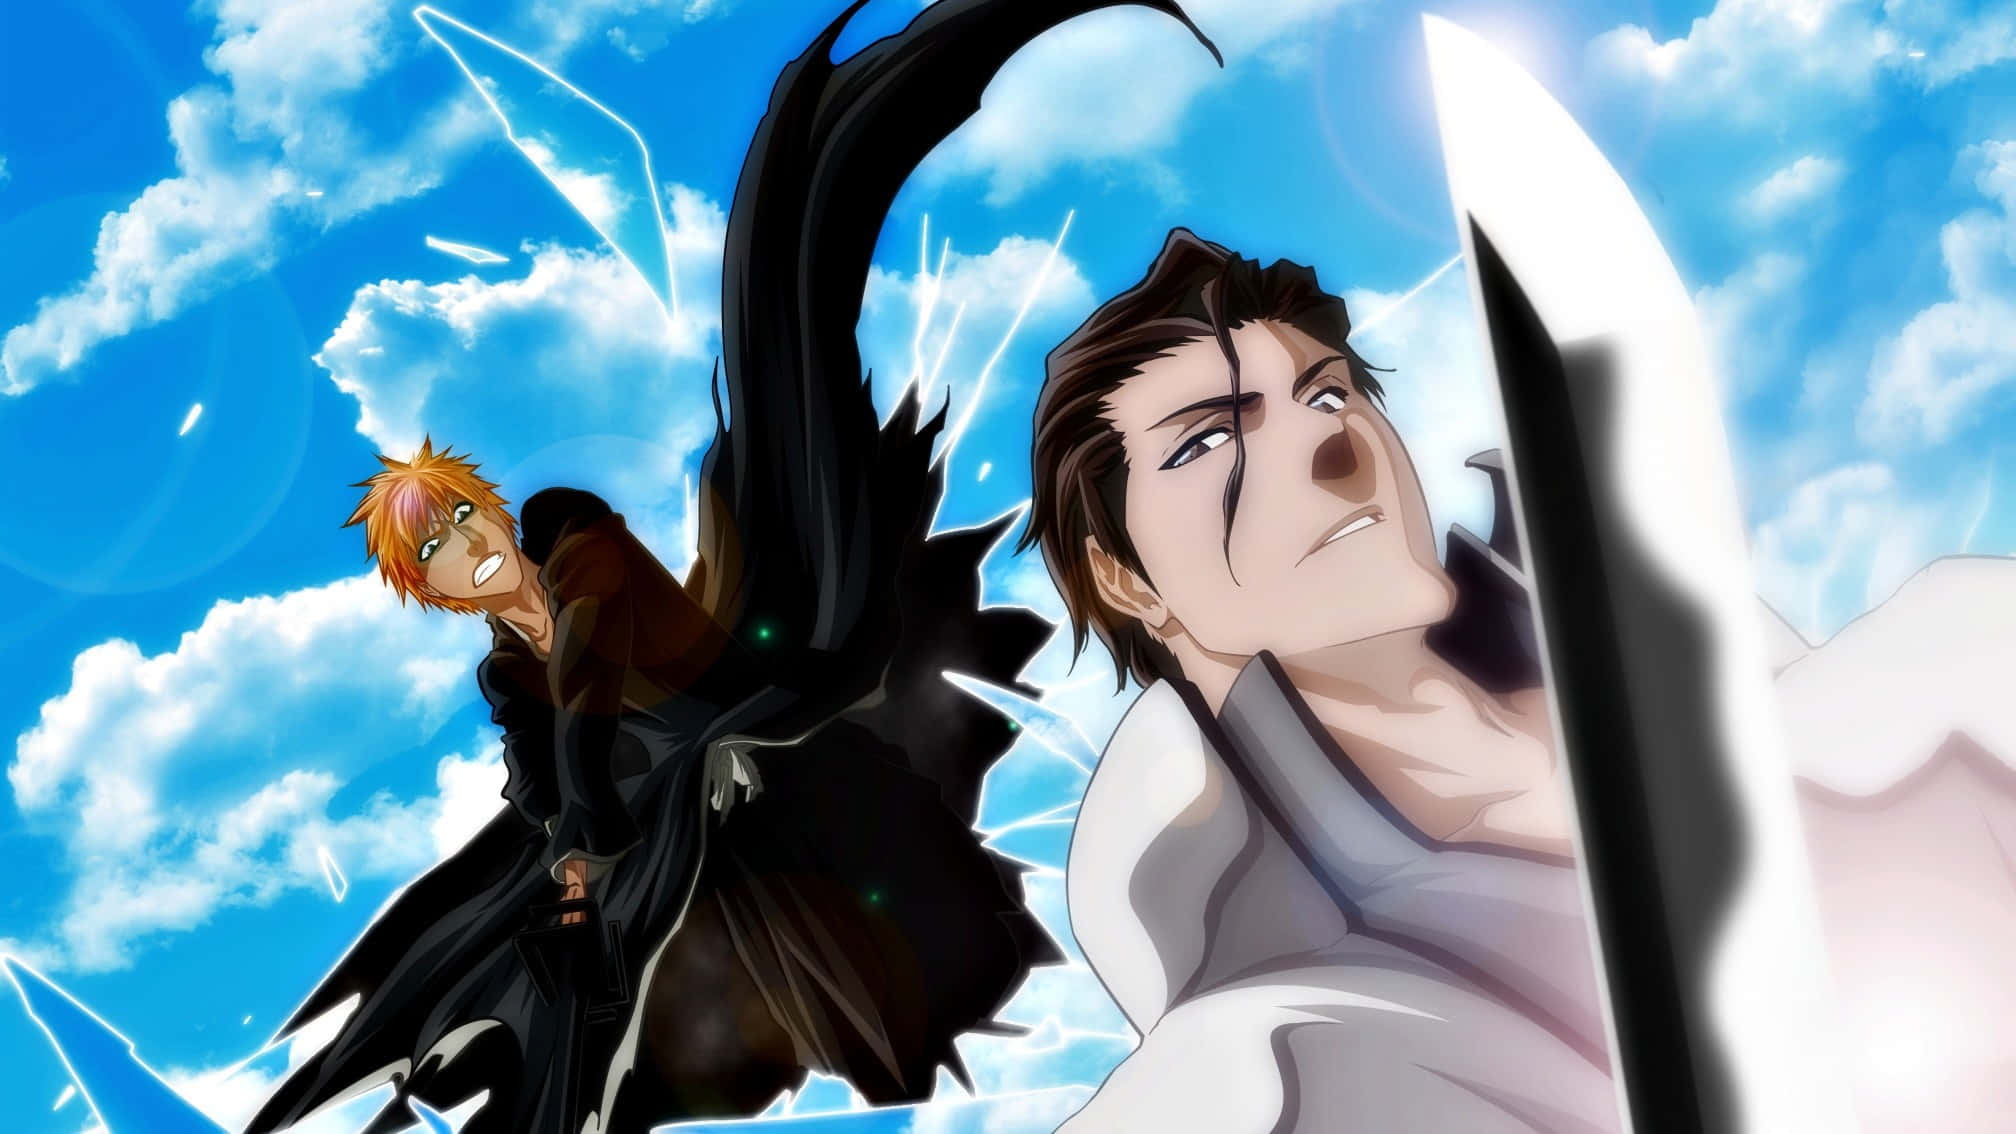 "A Committed Servant of Justice: Sosuke Aizen" Wallpaper